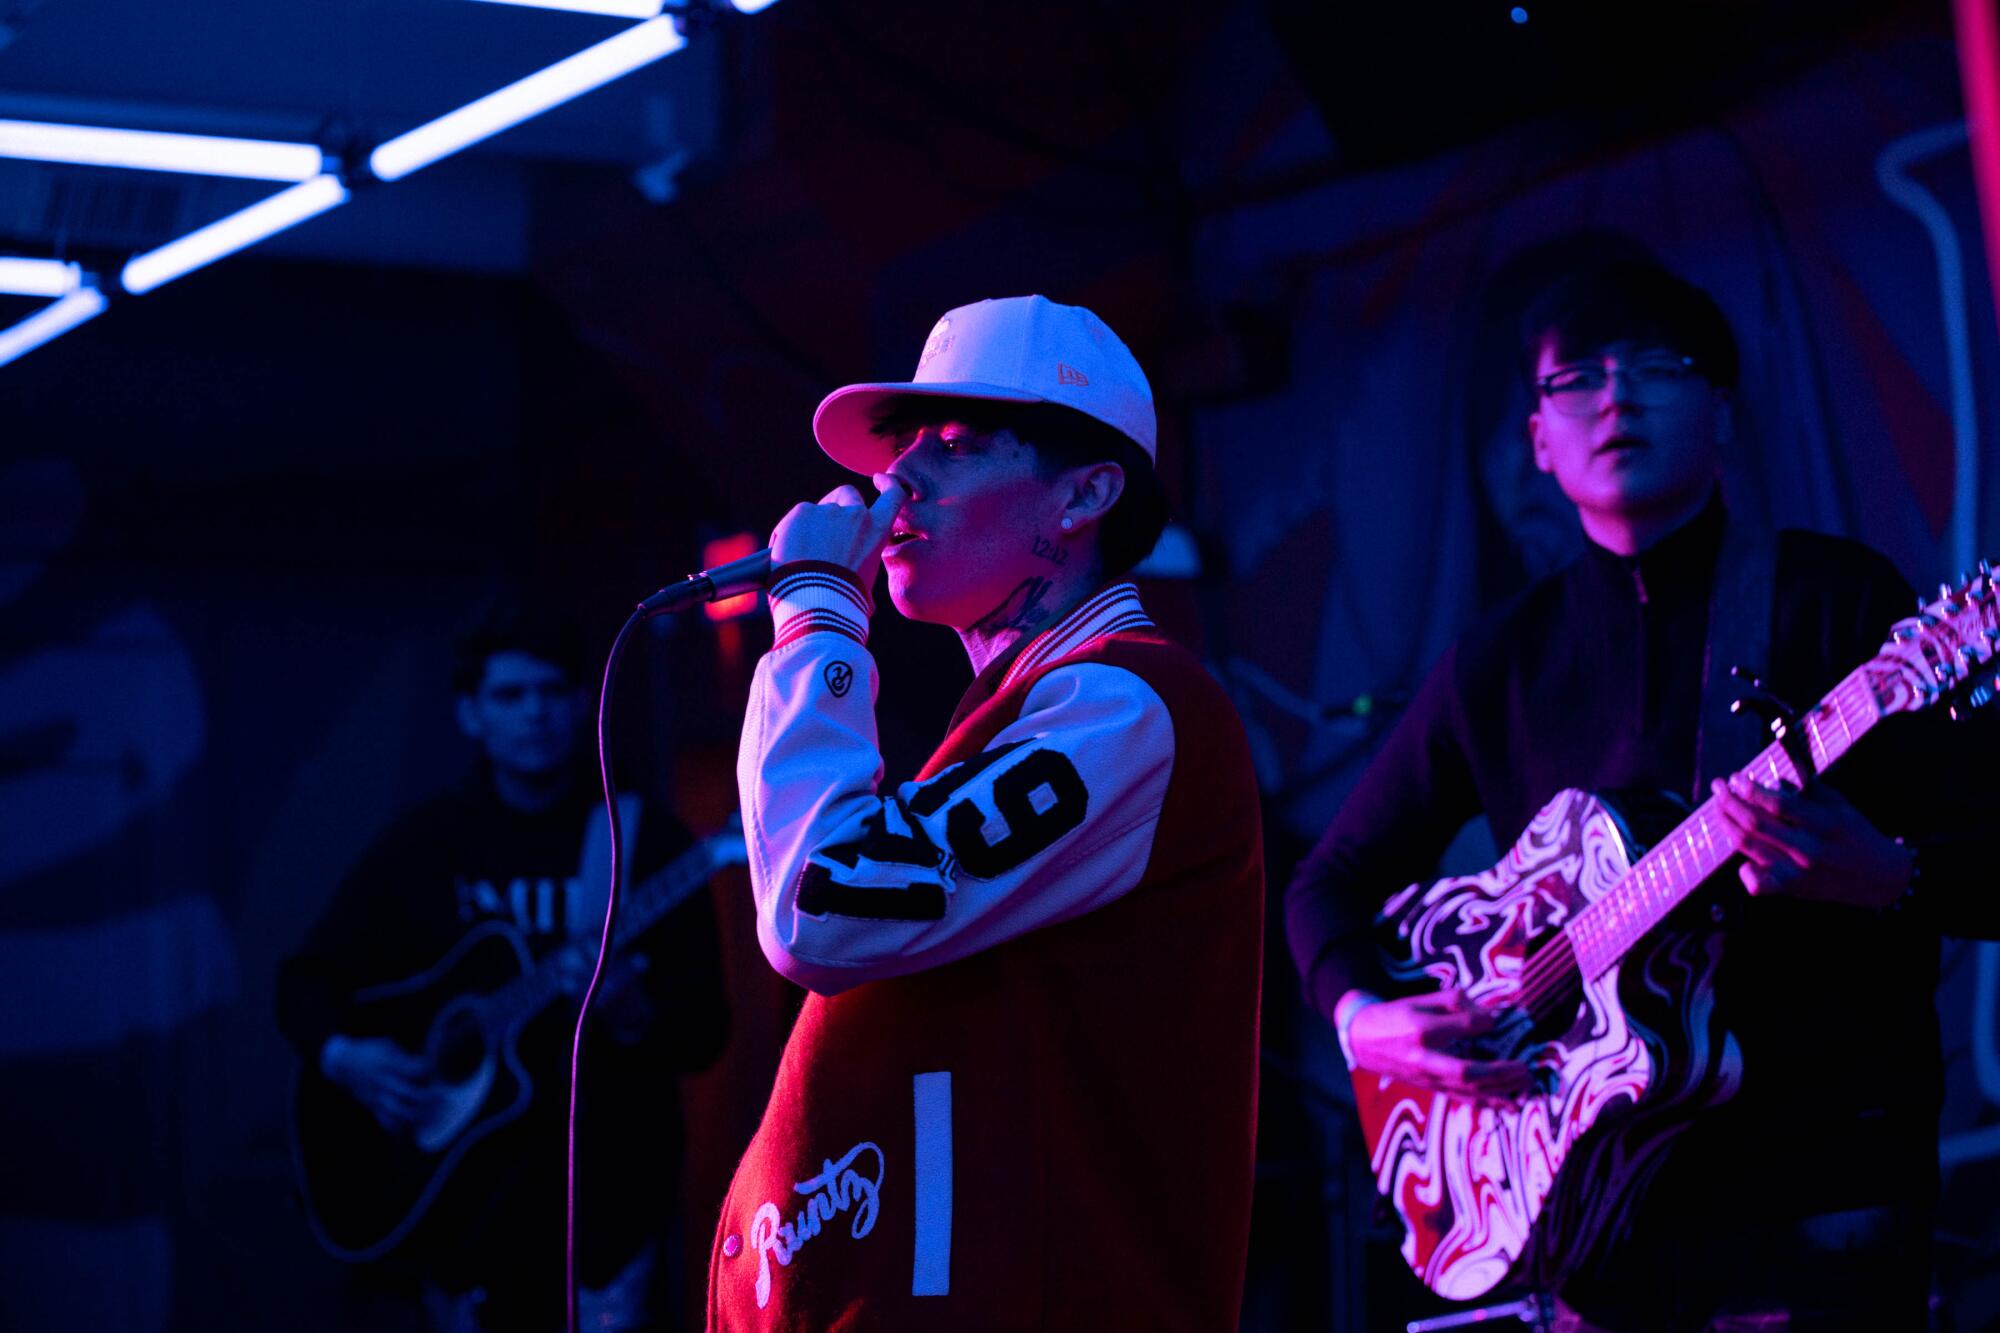 Polo González closed the night at De Los' showcase at SXSW on March 15.